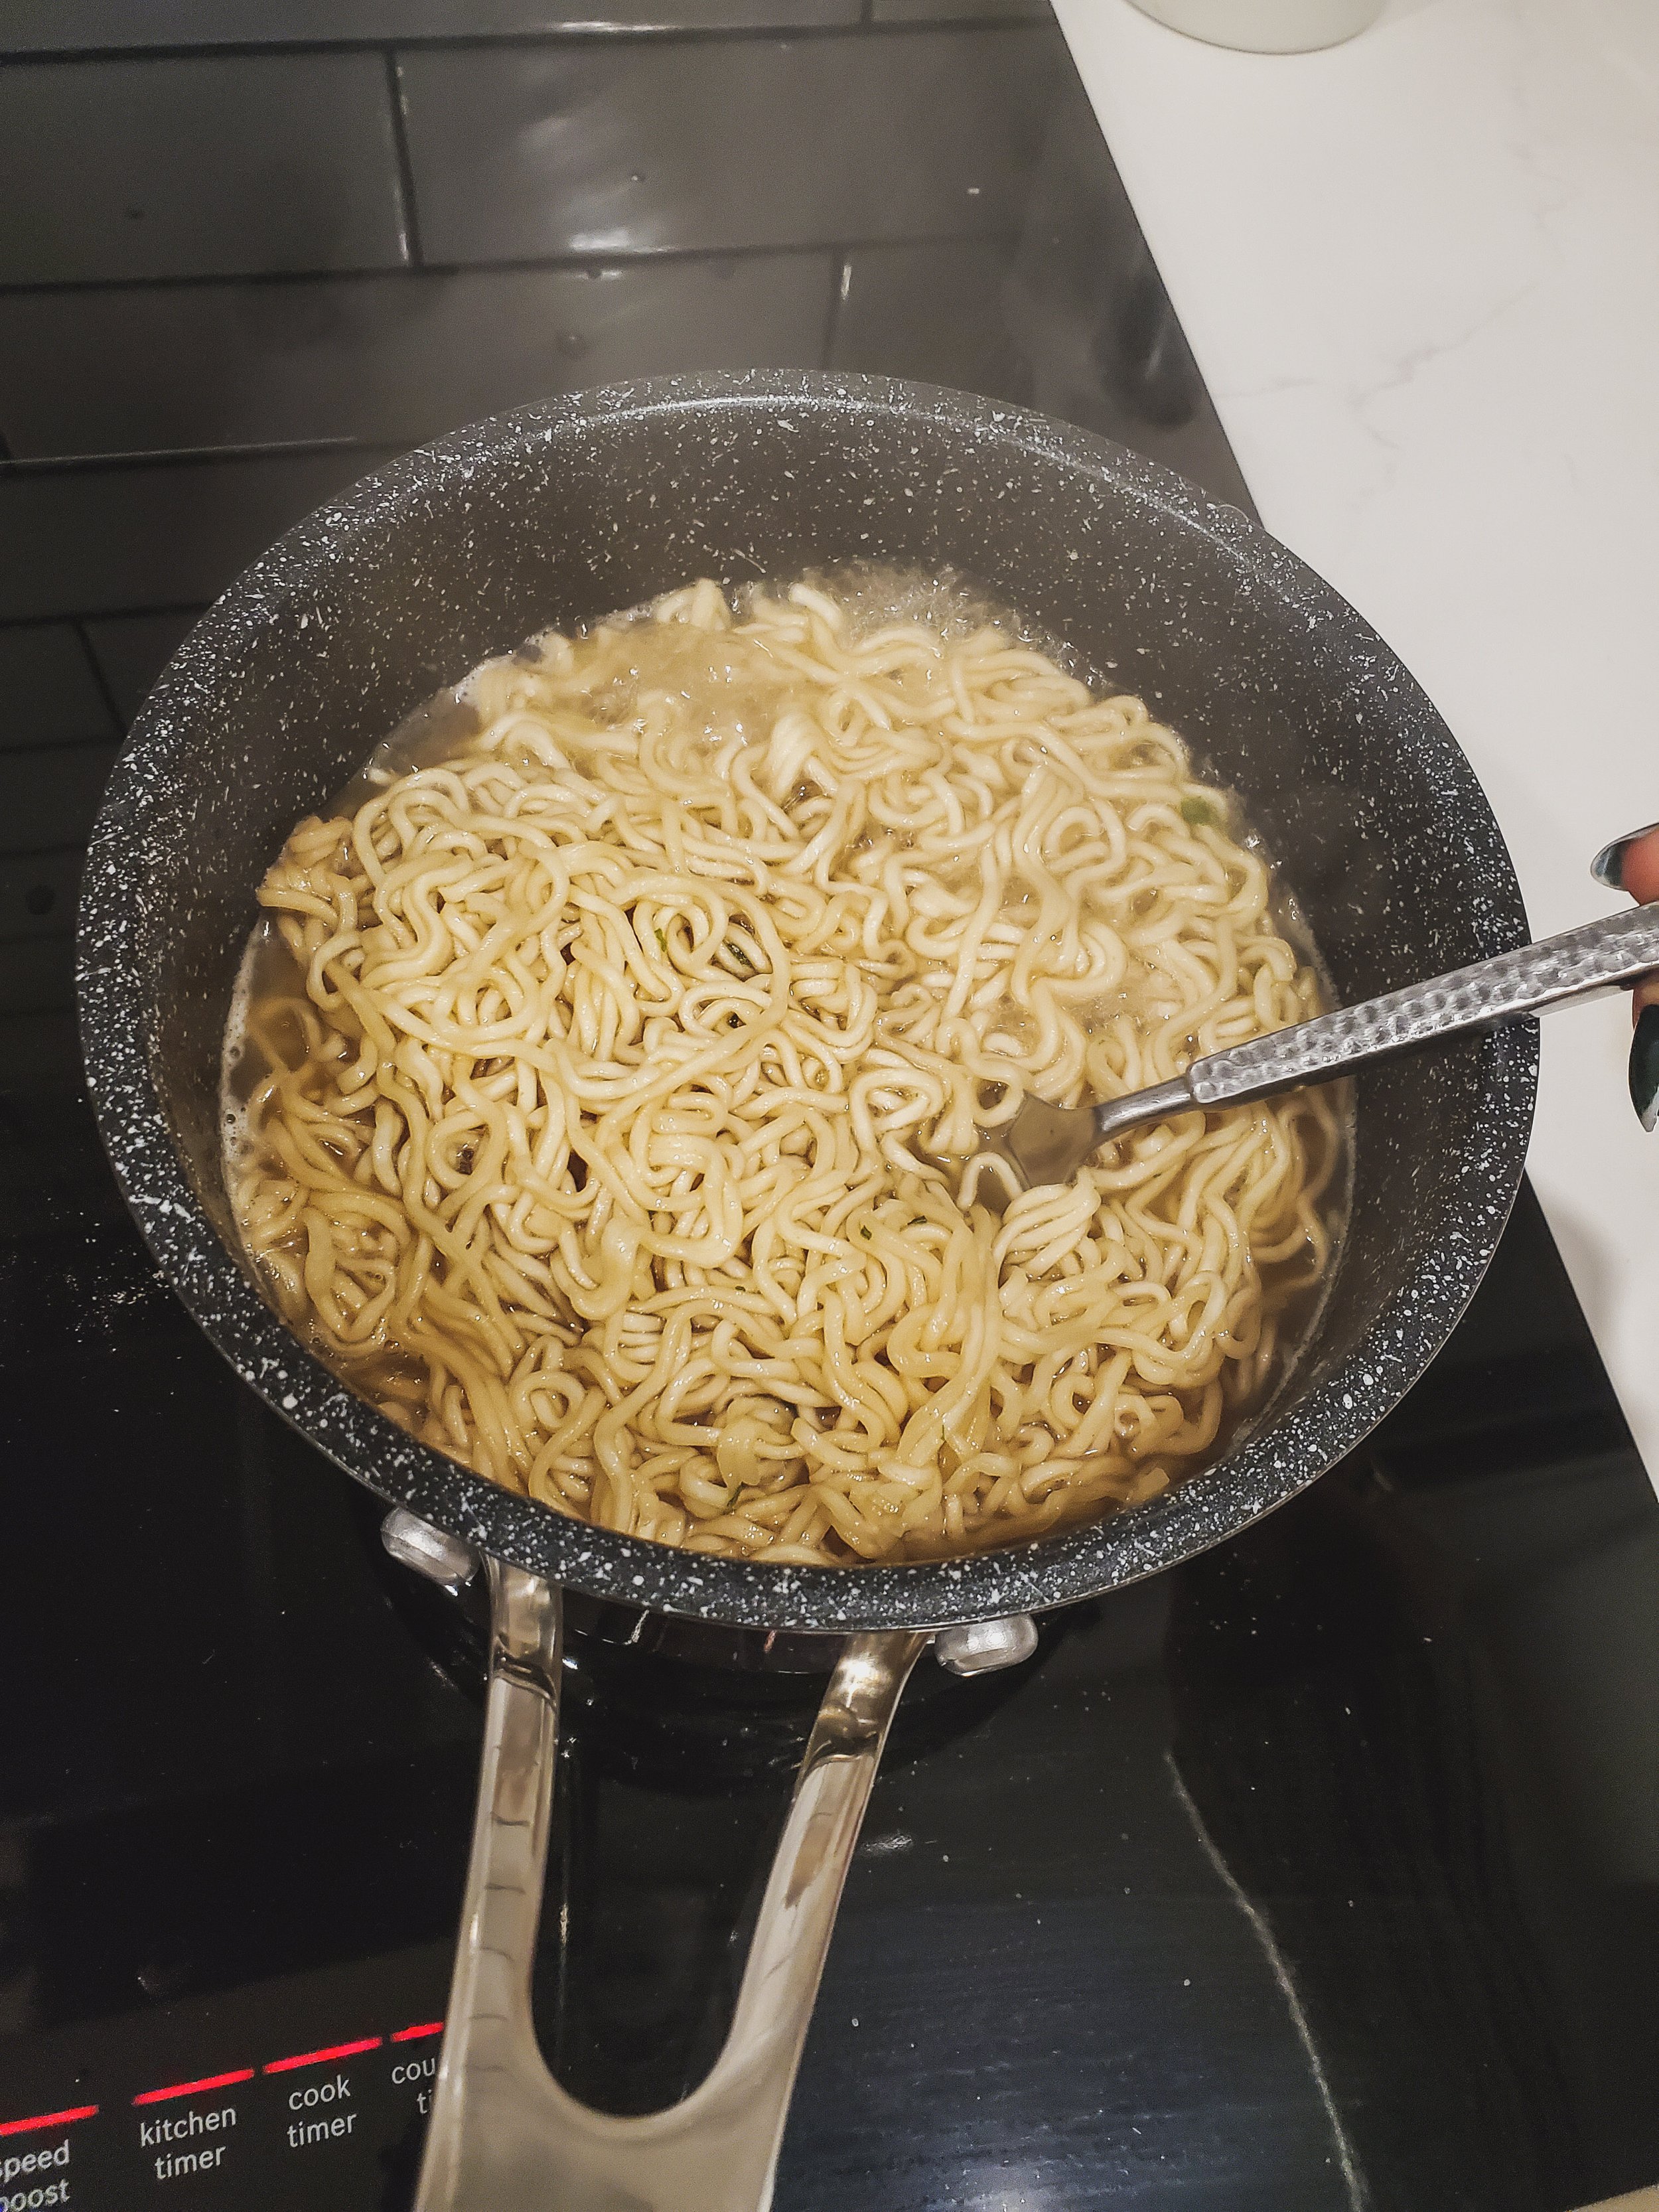  Instant noodles always makes a hard day better. This is my go to comfort food when I’m sick, or hungover or just having a shitty day. 